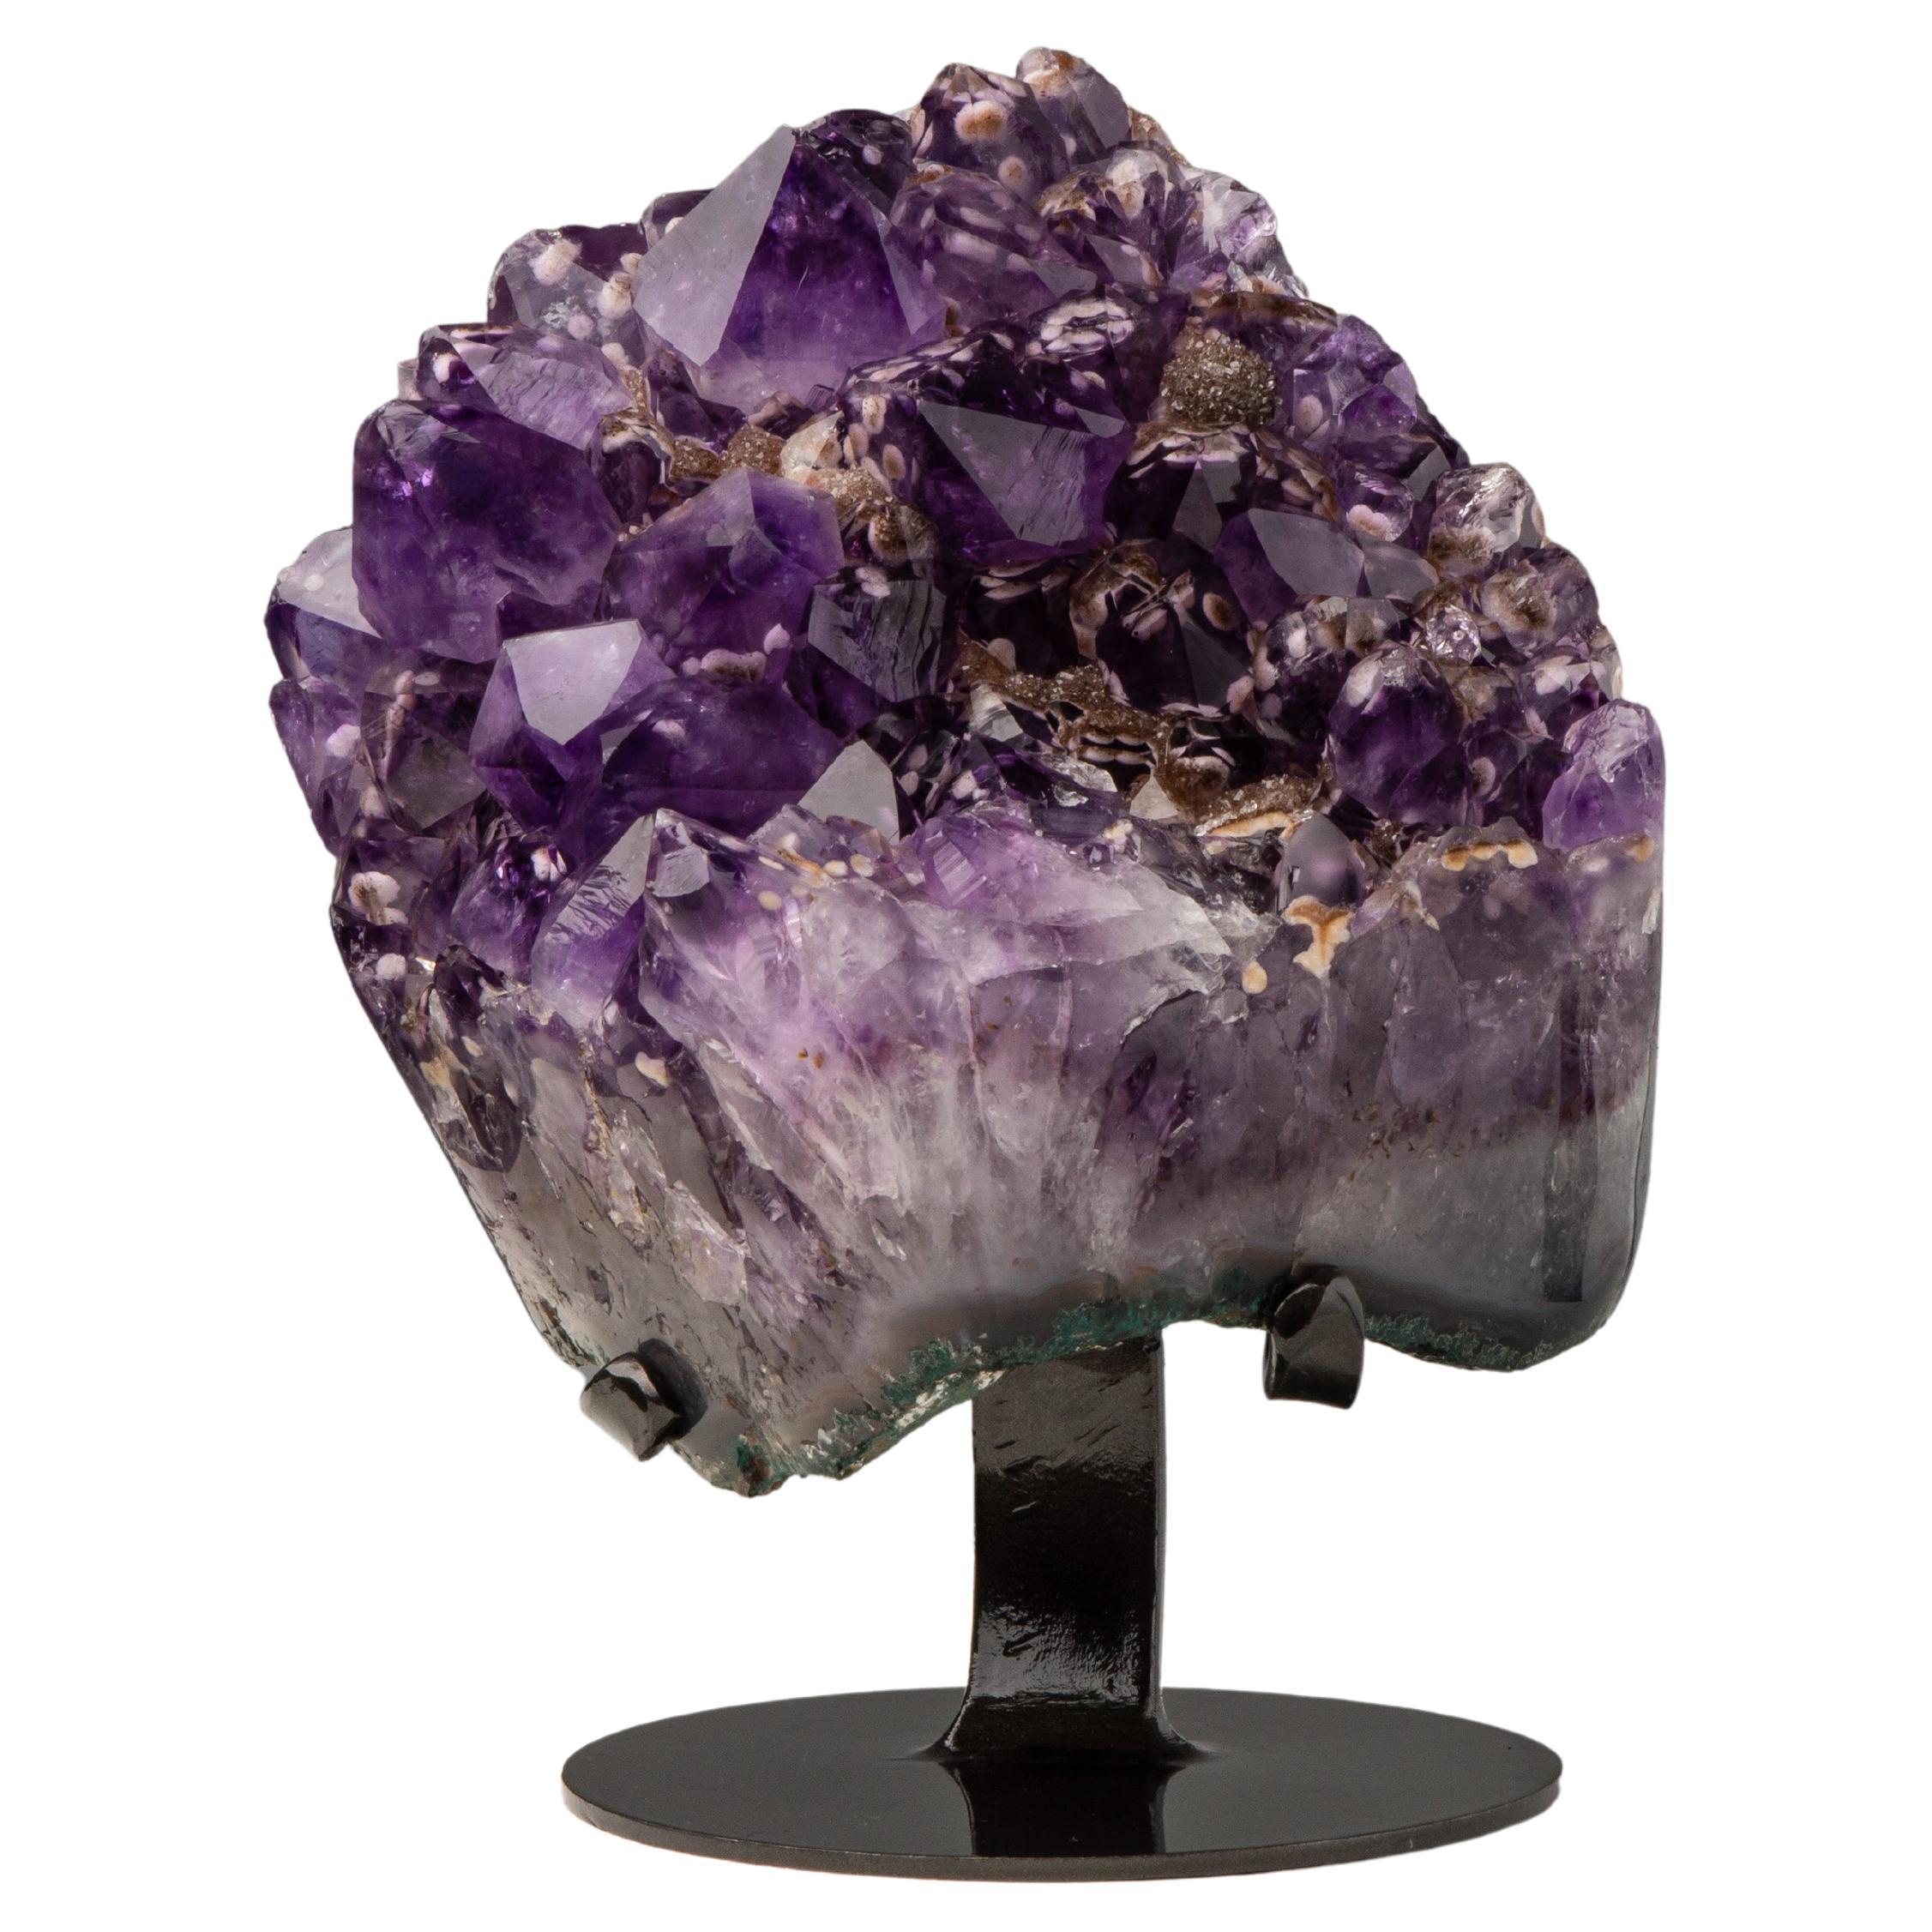 Deep Purple Amethyst with Goethite Inclusions Within For Sale